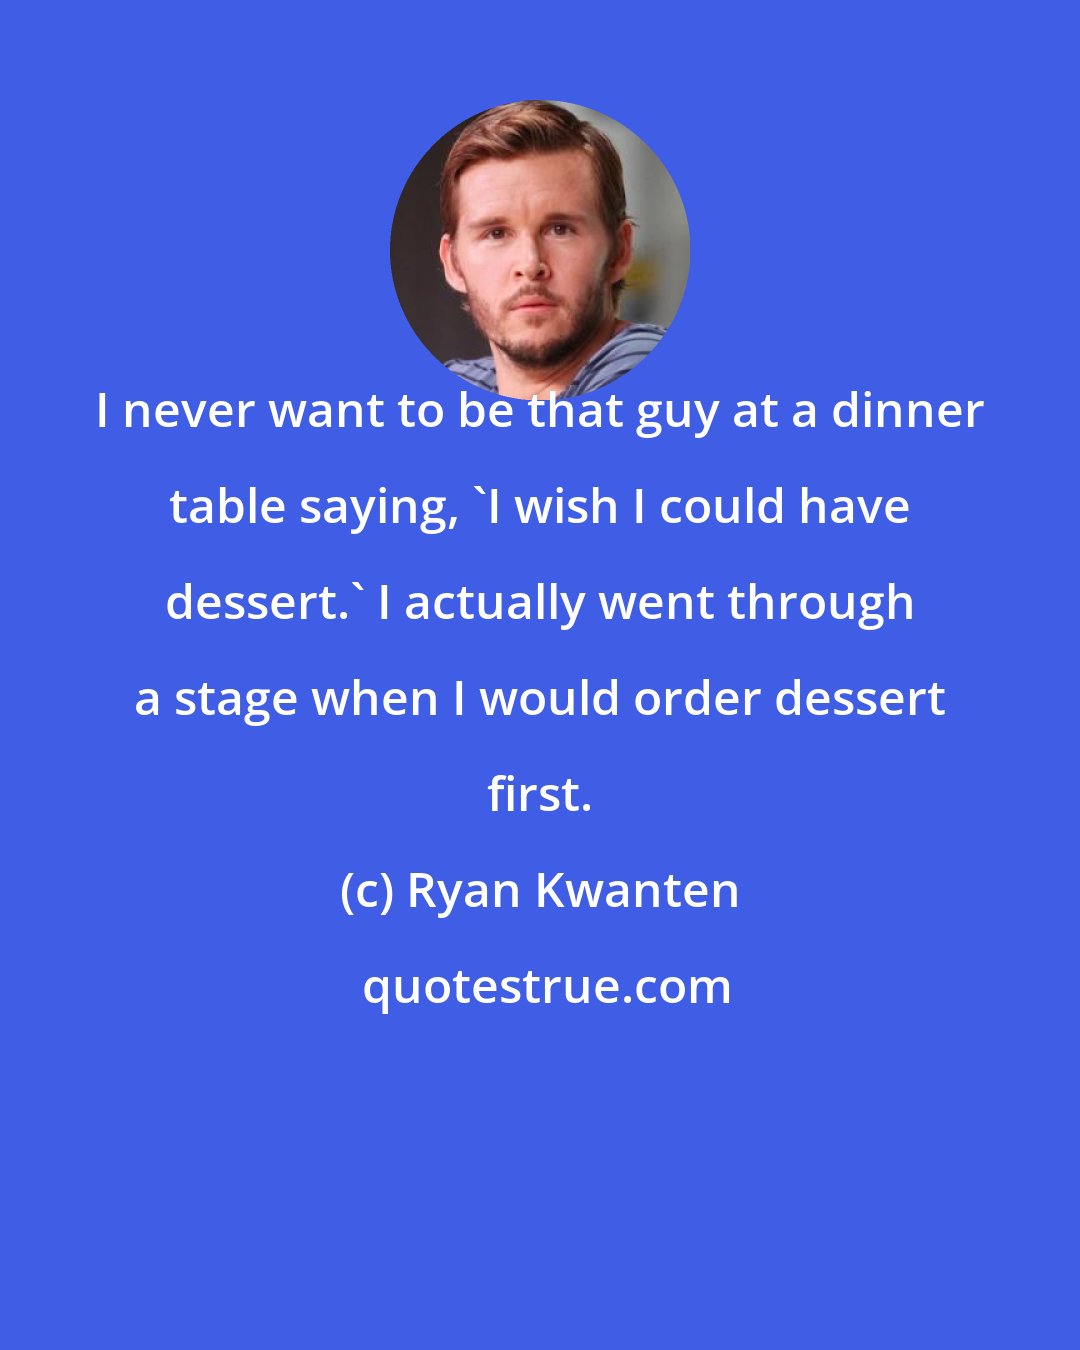 Ryan Kwanten: I never want to be that guy at a dinner table saying, 'I wish I could have dessert.' I actually went through a stage when I would order dessert first.